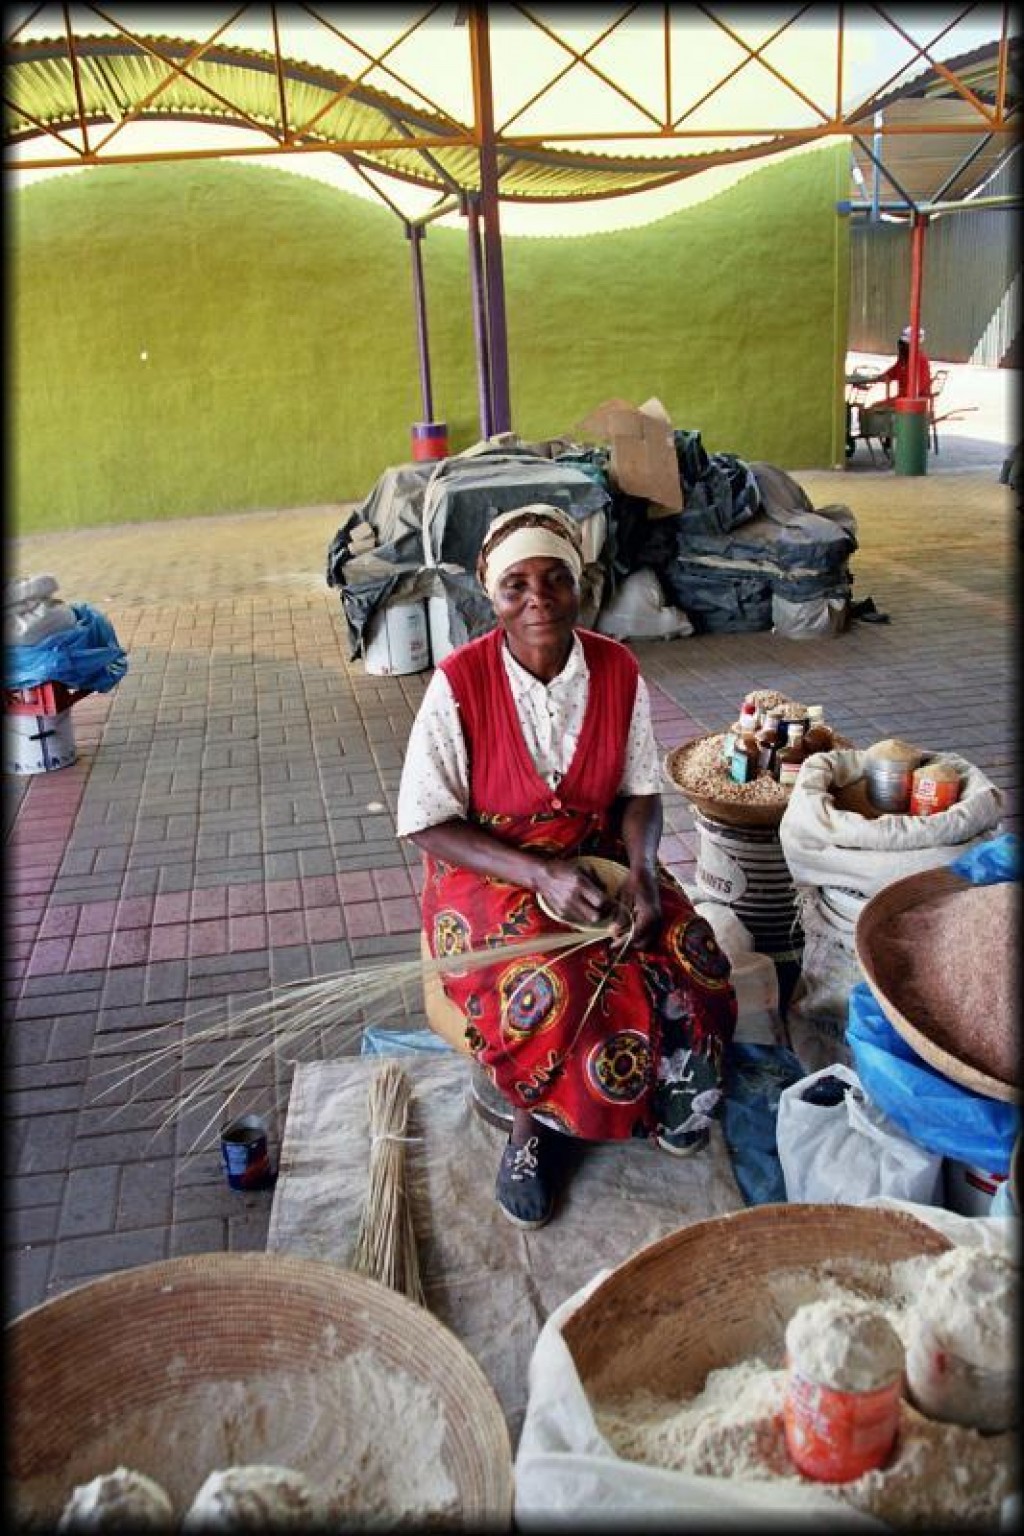 This lady was making baskets to hold the flour.